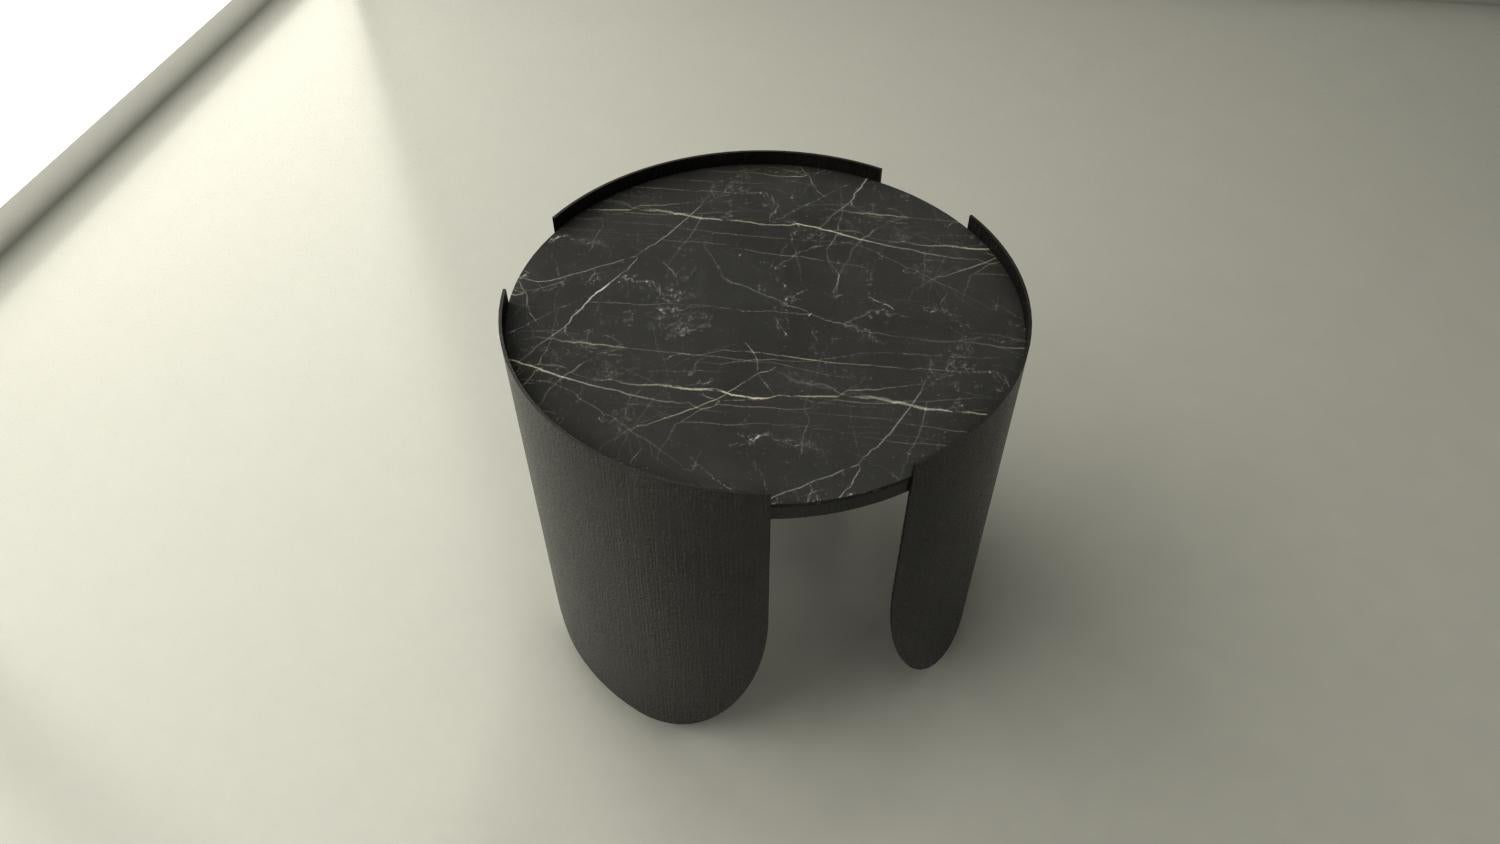 Matty Side Table by Doimo Brasil
Dimensions:  D 60 x H 50 cm 
Materials: Base: metal, Top: reconstituted stone.
Also available in wood or grass top options.


With the intention of providing good taste and personality, Doimo deciphers trends and